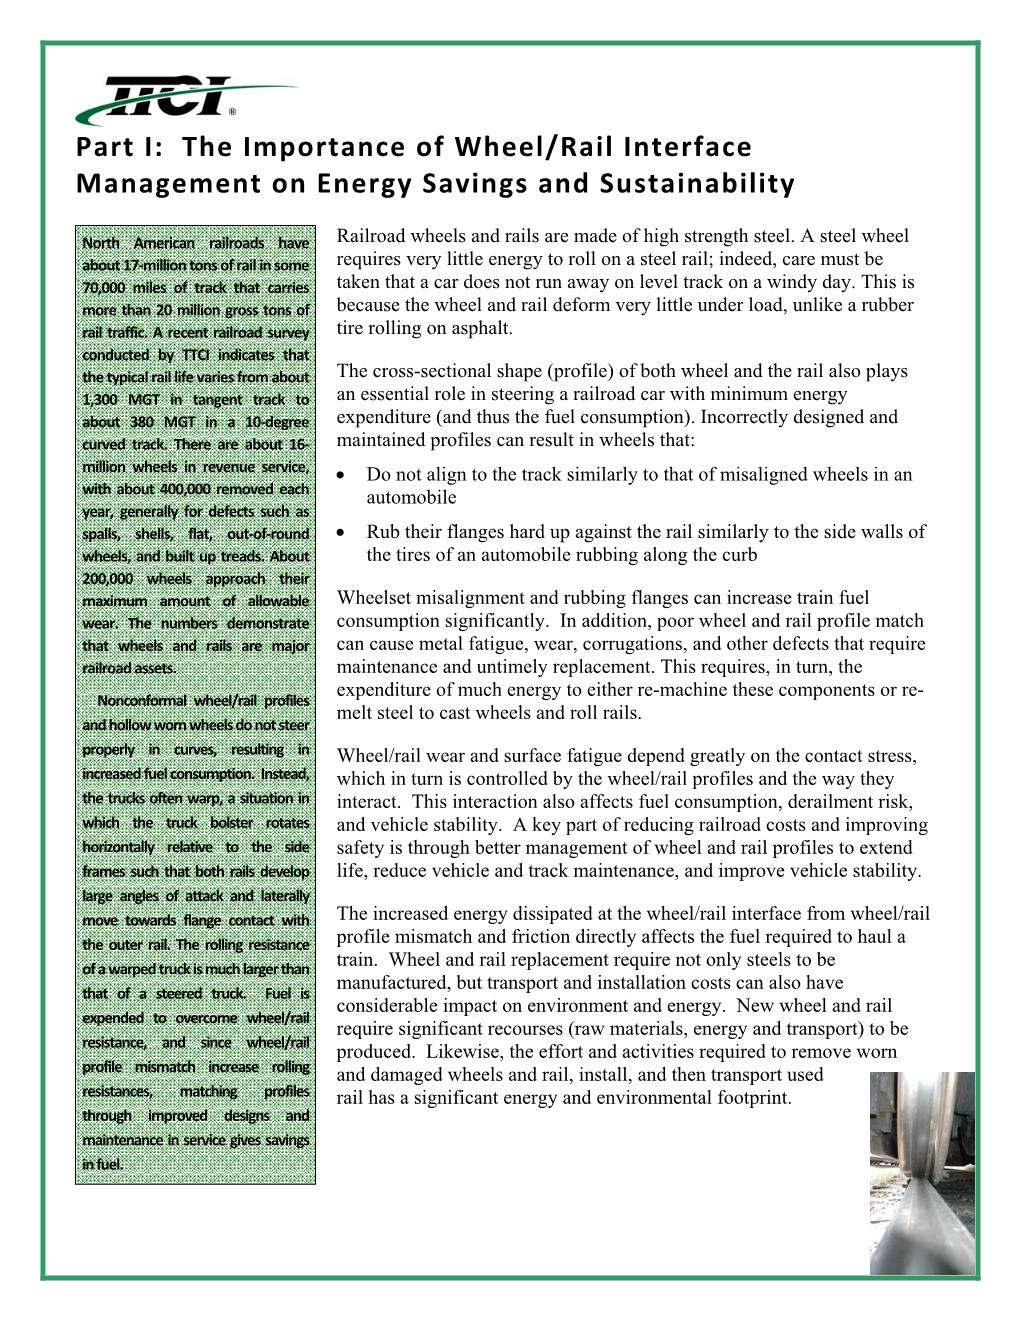 Part I: the Importance of Wheel/Rail Interface Management on Energy Savings and Sustainability